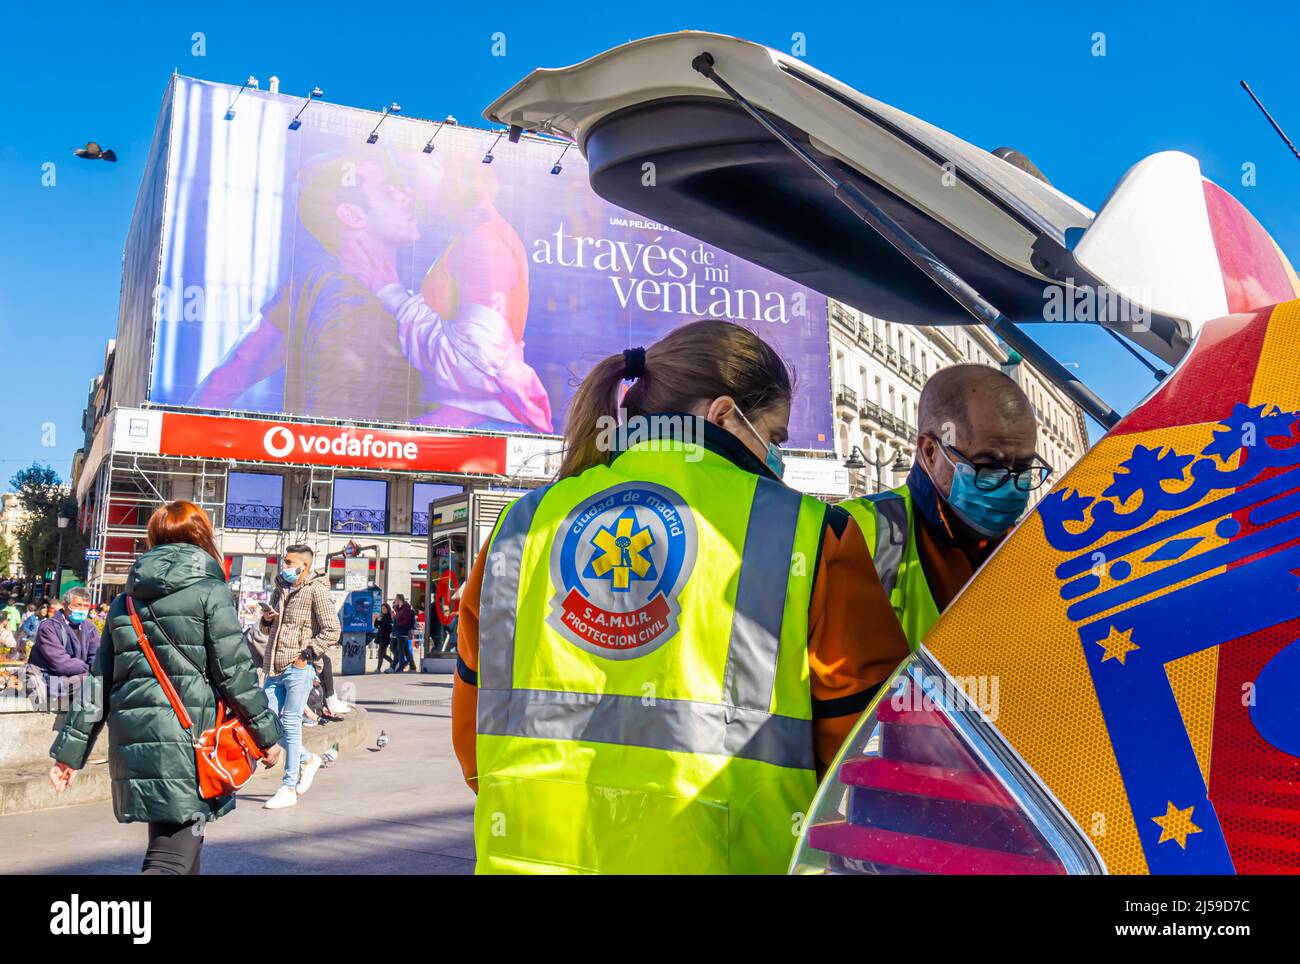 SAMUR Protection Civil female and male employees in uniform vests, face masks with their van's trunk opened in Plaza Mayor, Madrid, Spain Stock Photo